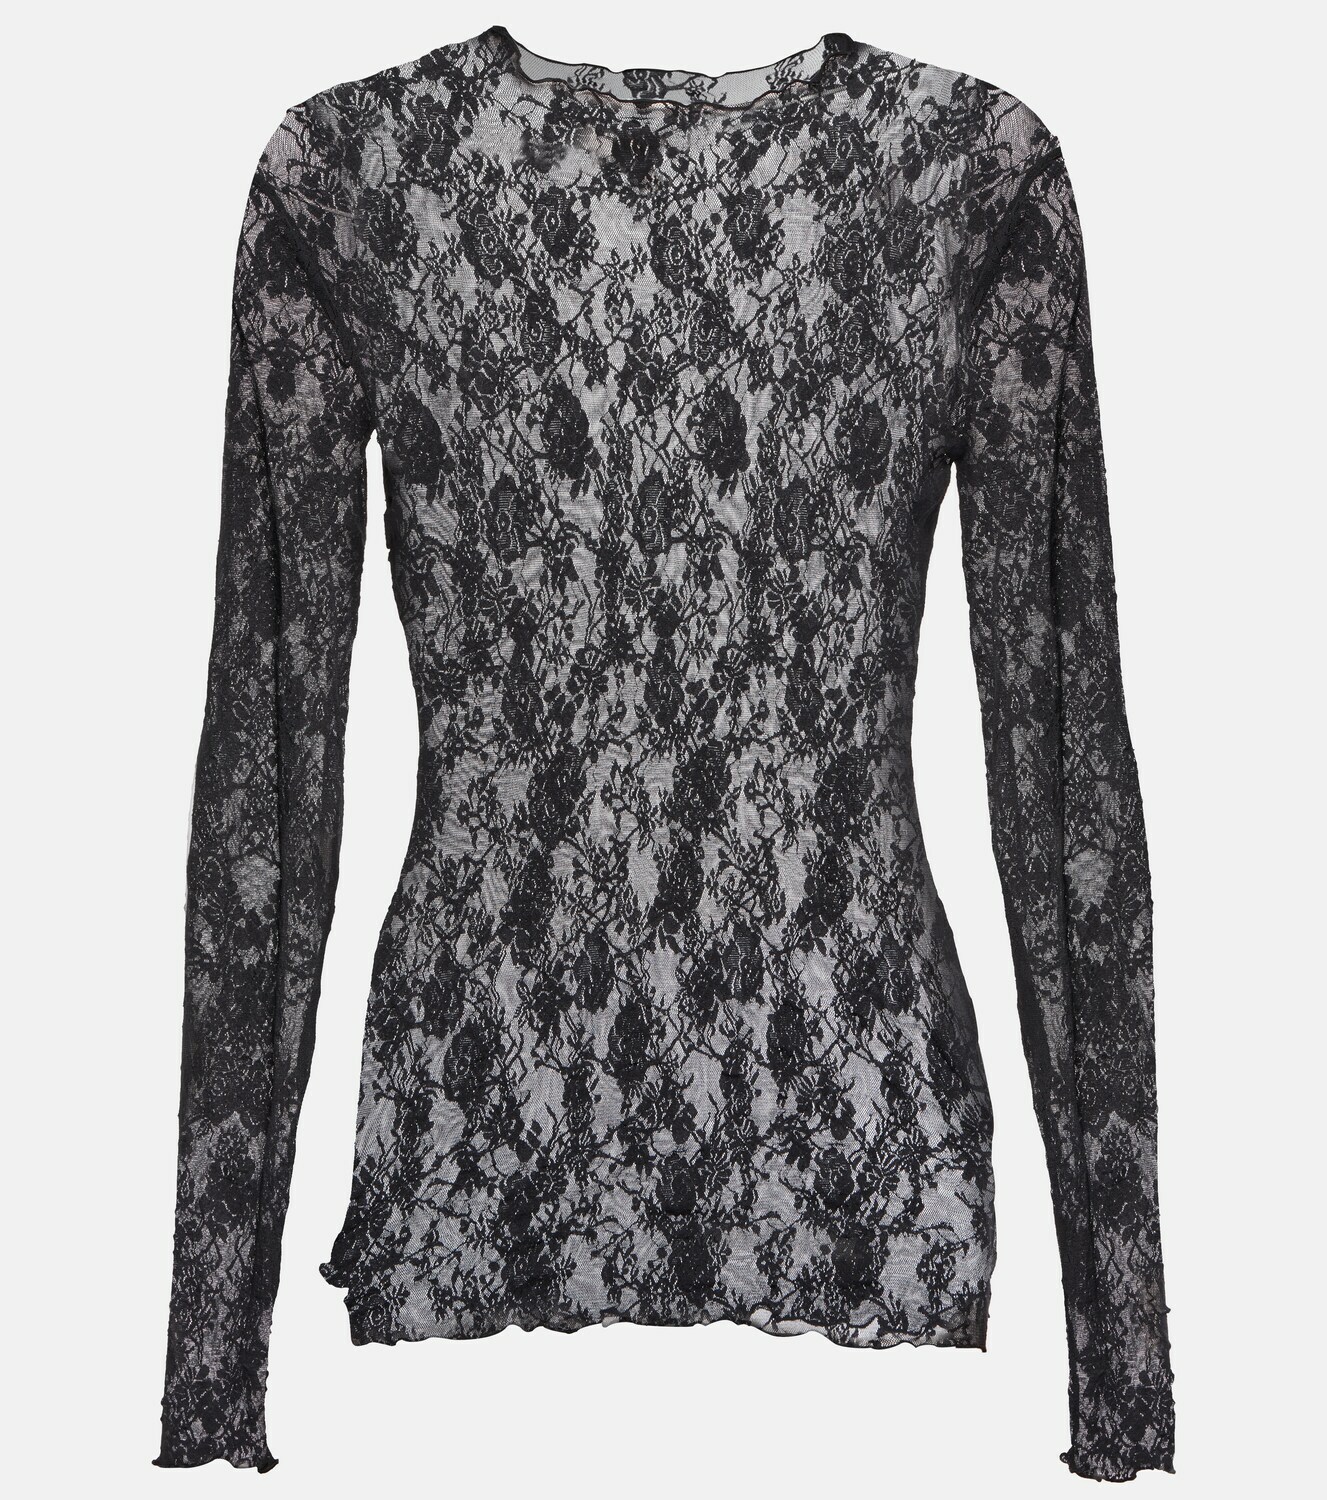 Wolford - Floral lace top Wolford